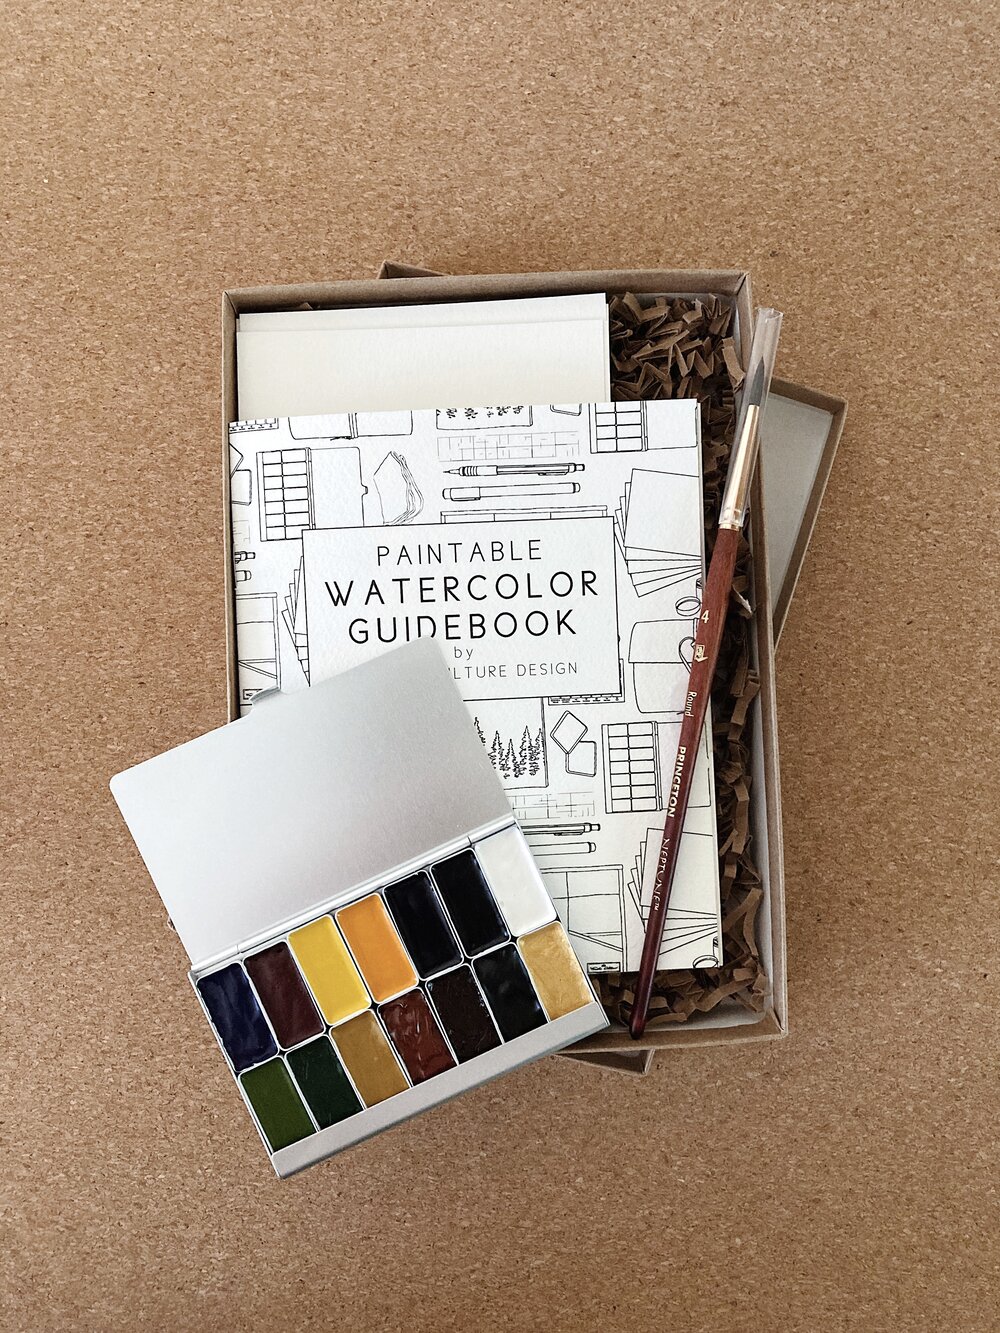 Watercolor Painting Kit - The Minimalist — Forest Culture Design